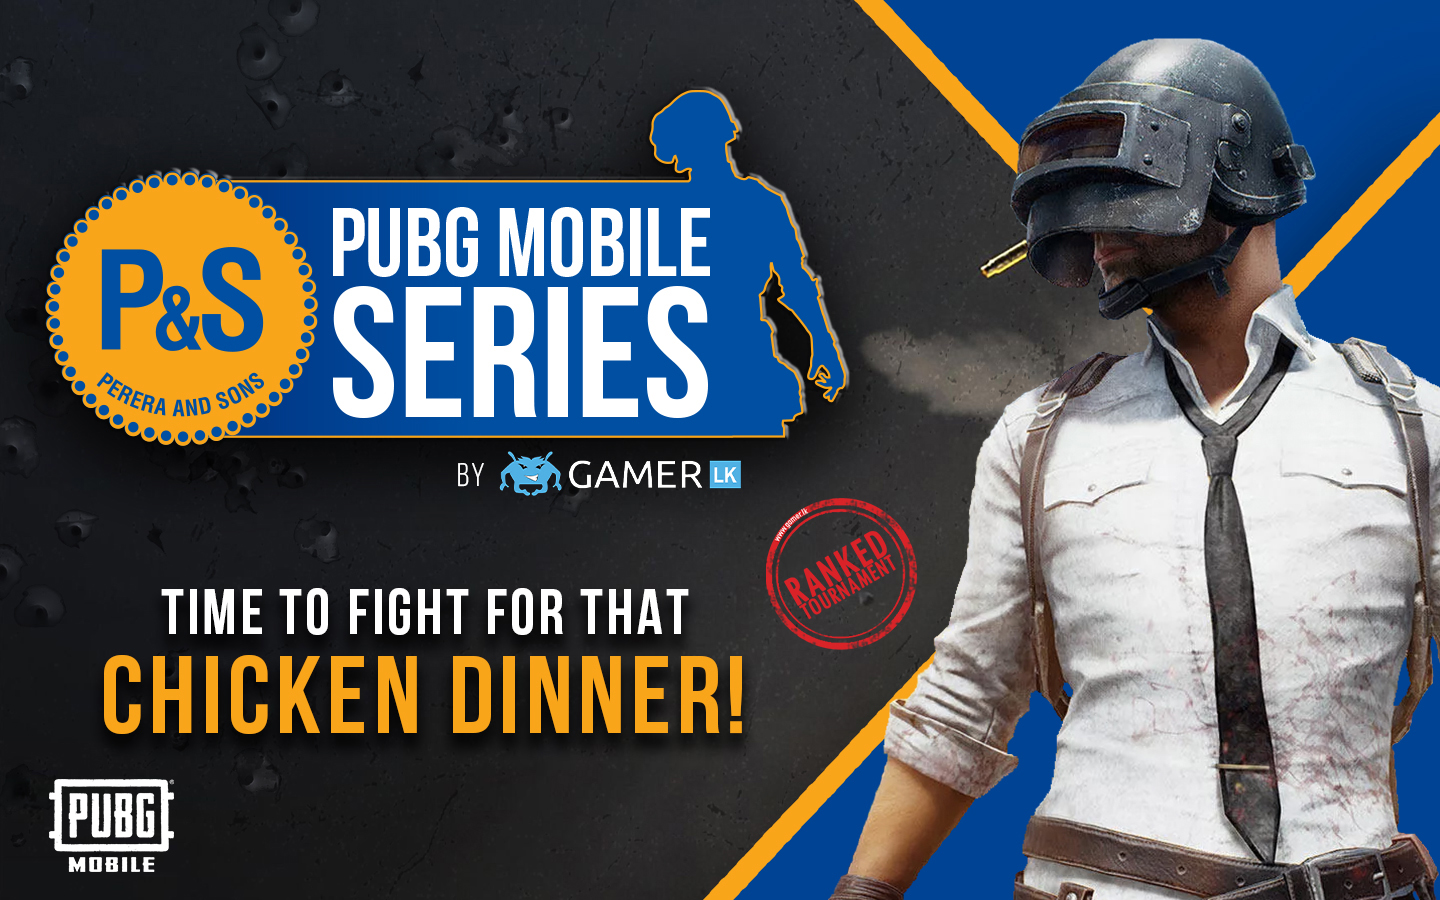 PandS PUBG Mobile Series by Gamer.LK InGame Esports